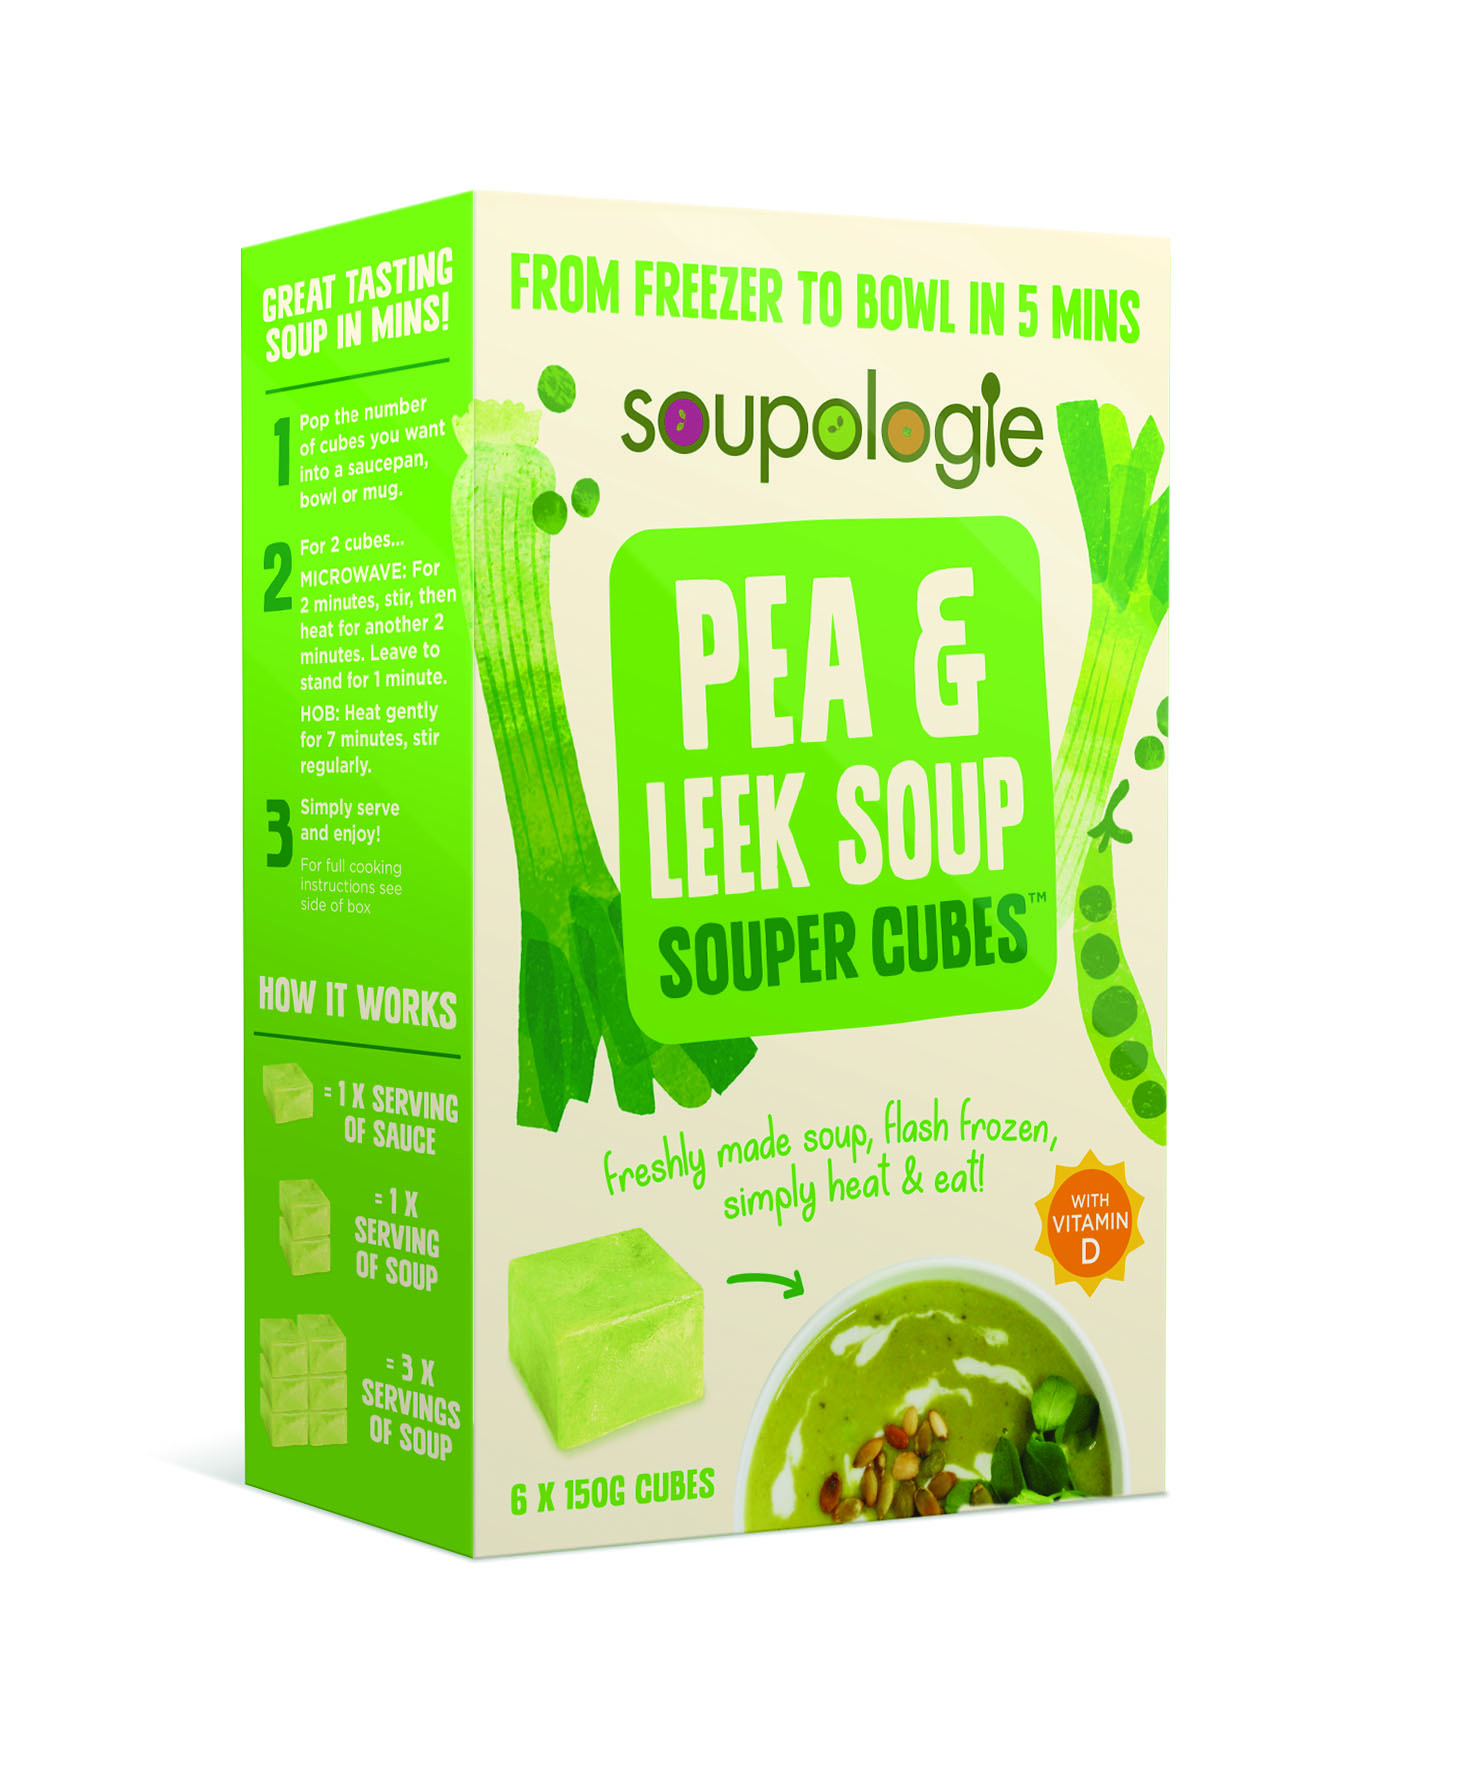 cut out image showing green and white box of pea and leak soup cubes from soupologie